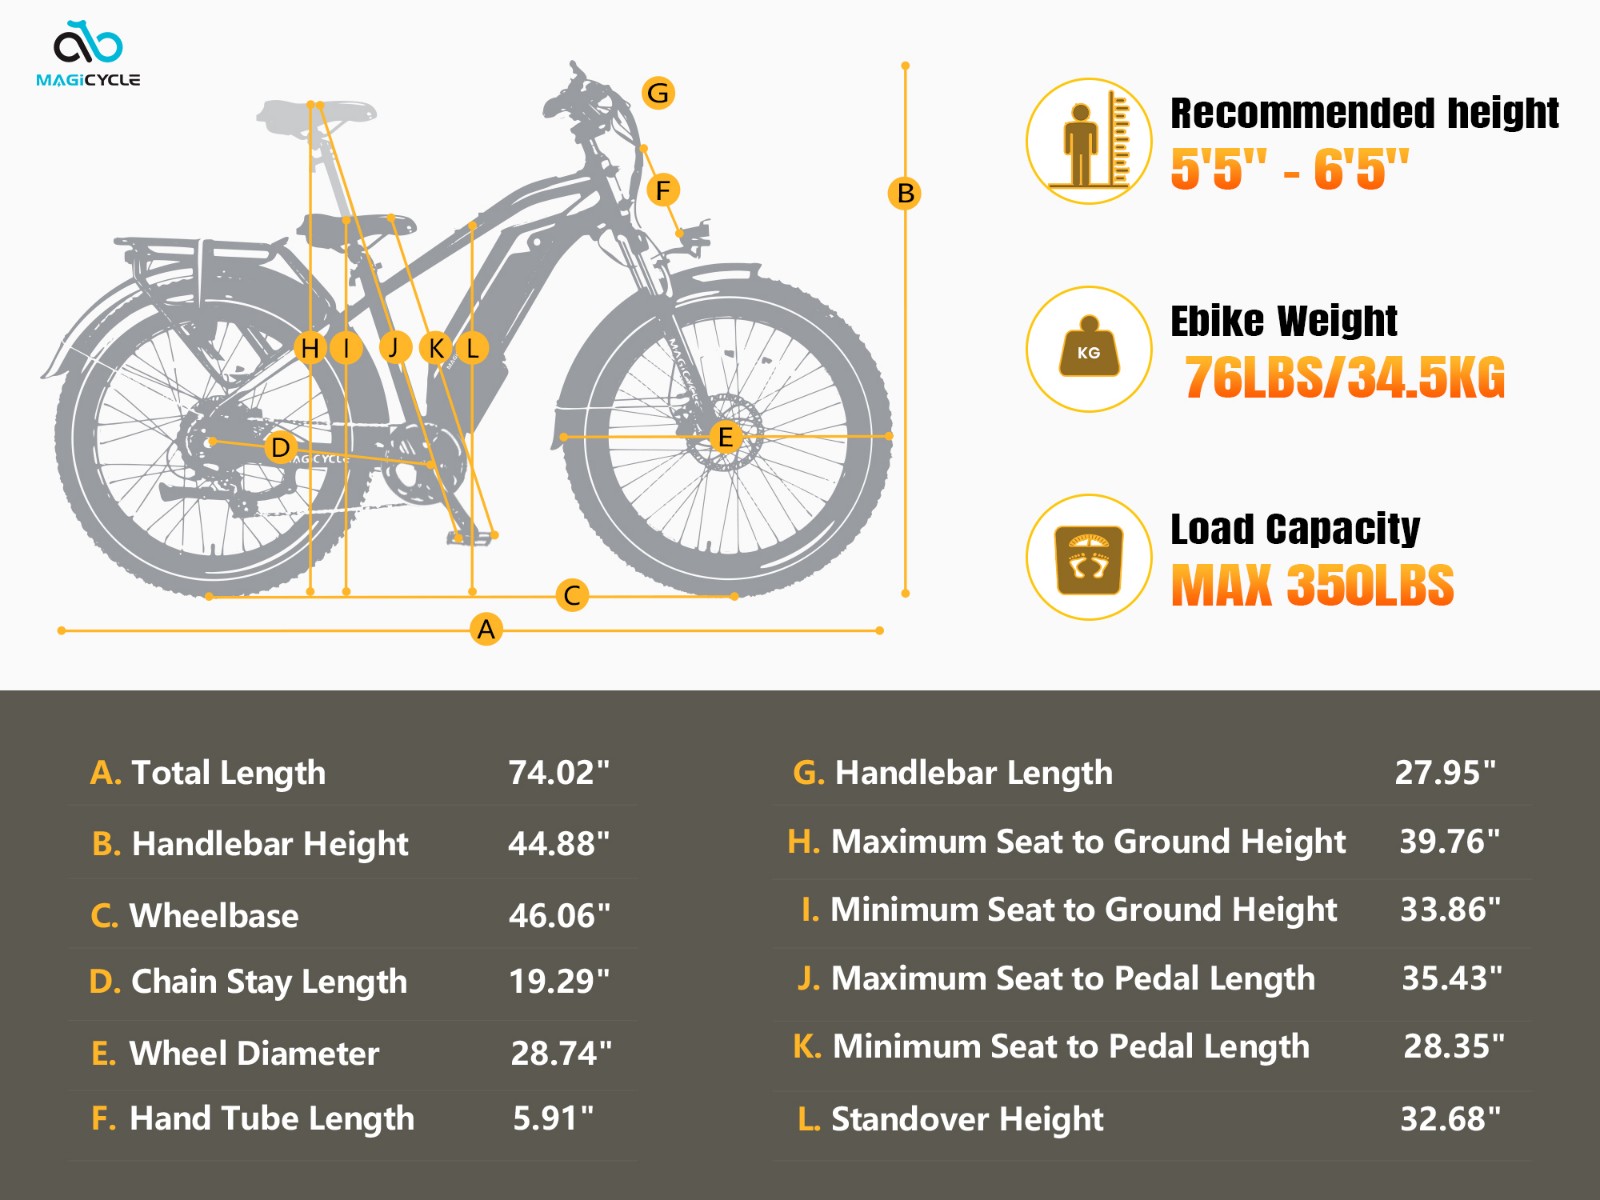 Combo Sale - Magicycle Cruiser Pro Ebike with Second 52V 20Ah Battery